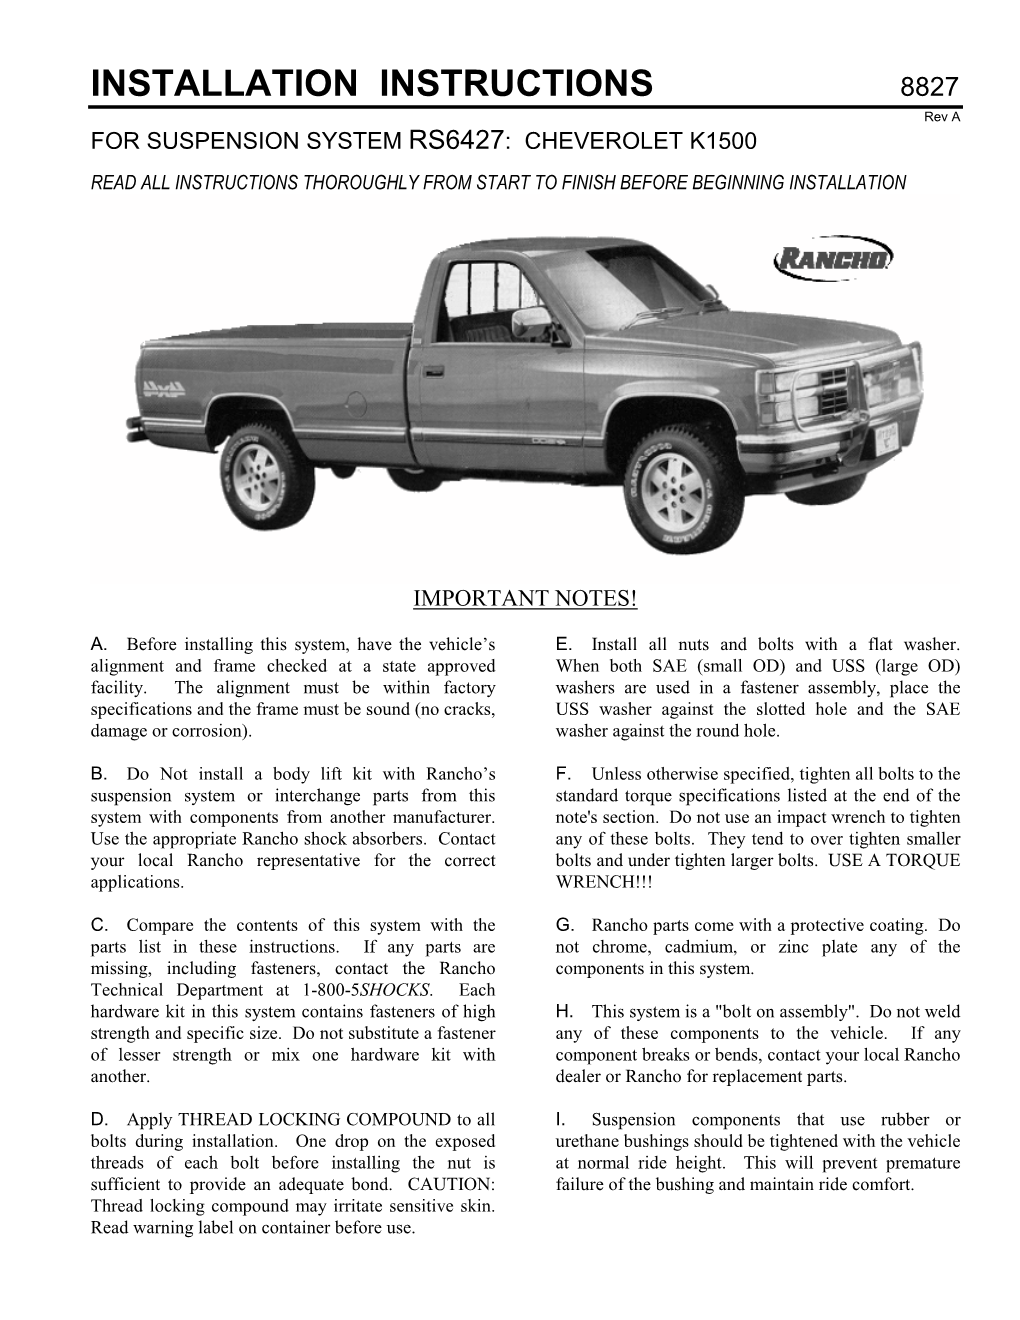 INSTALLATION INSTRUCTIONS 8827 Rev a for SUSPENSION SYSTEM RS6427: CHEVEROLET K1500